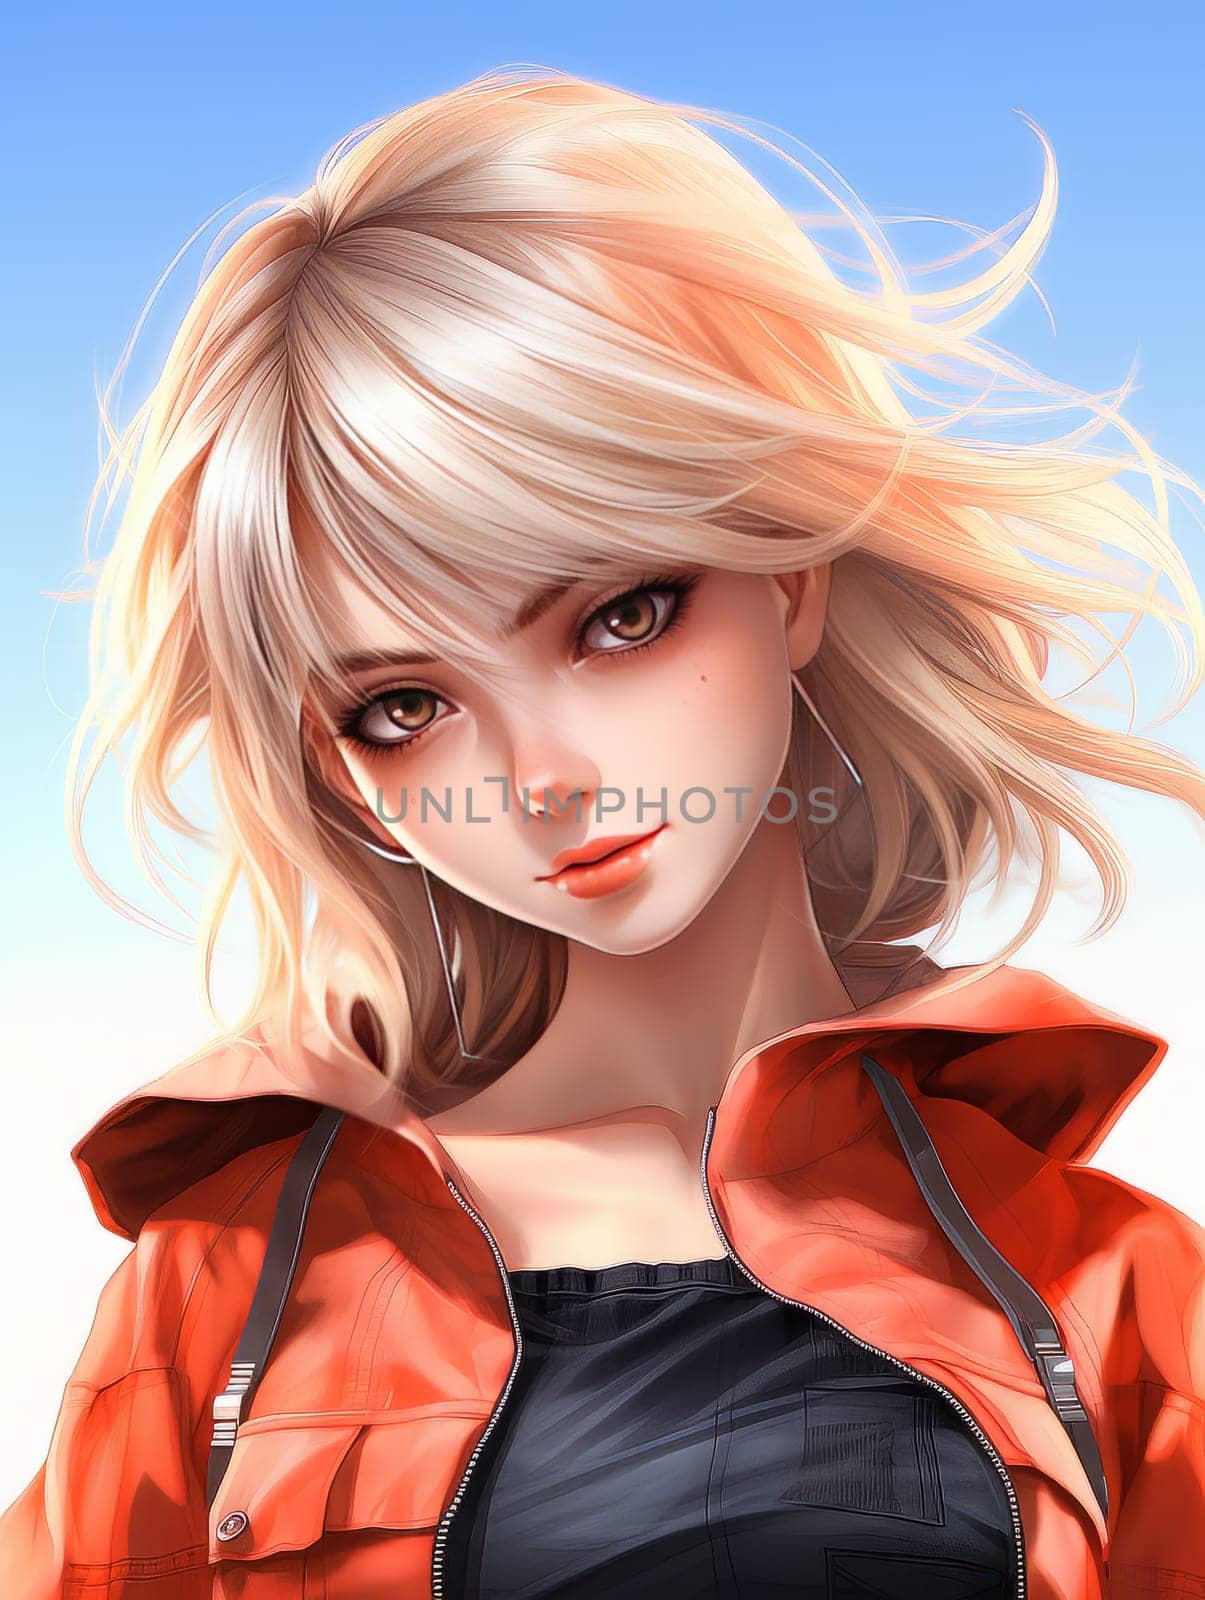 Anime girl in manga style. AI by but_photo